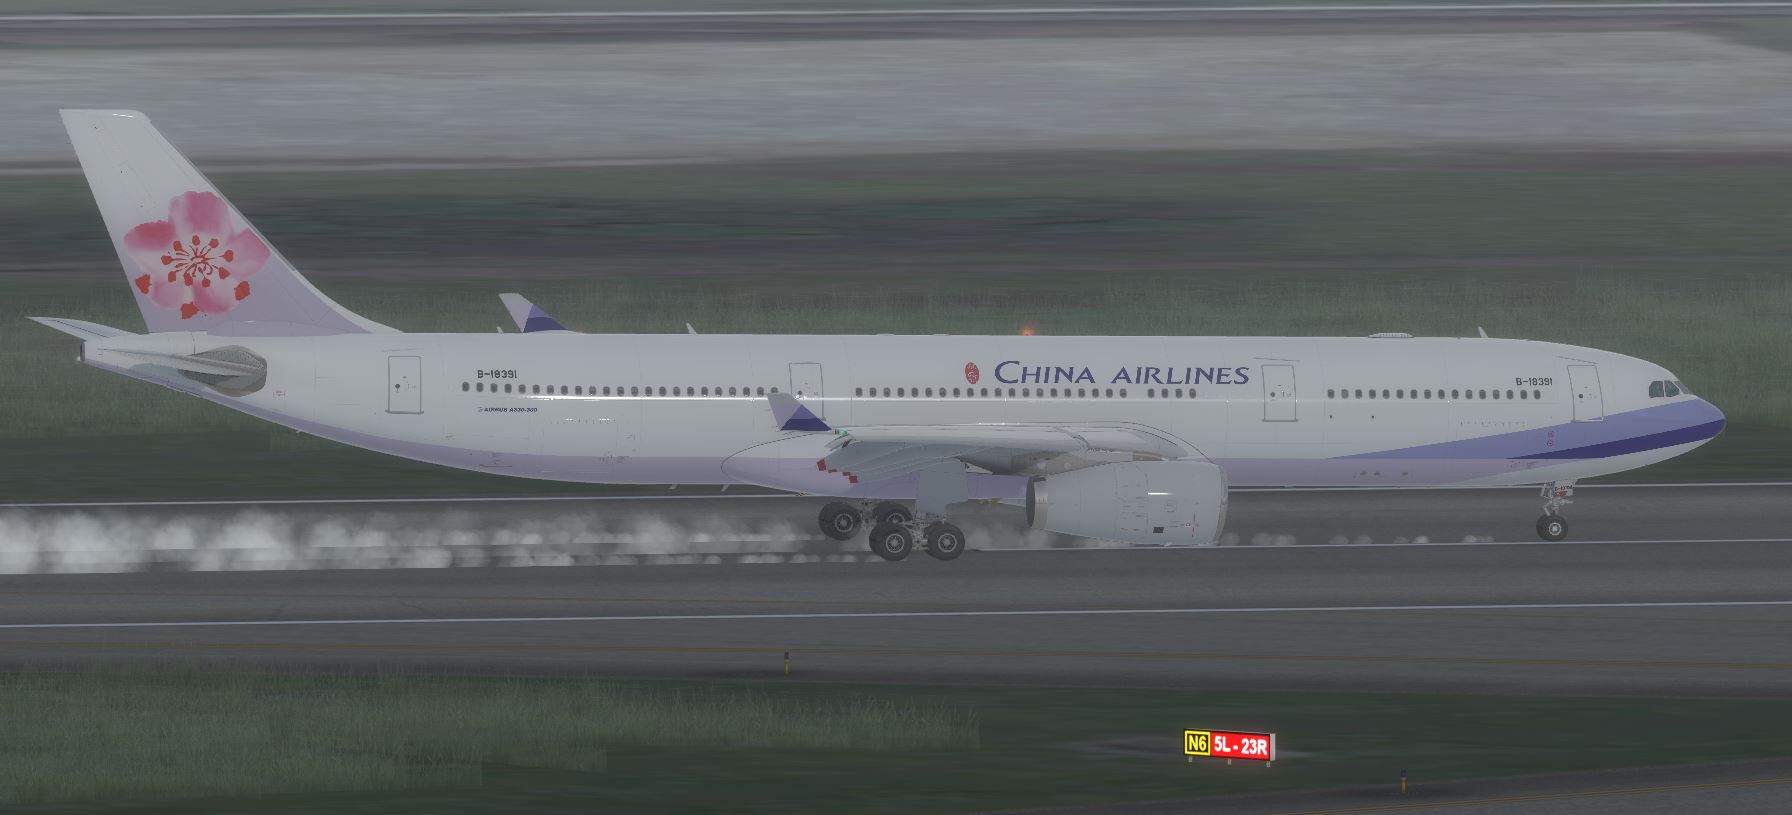 AS A330 ChinaAirline-6436 